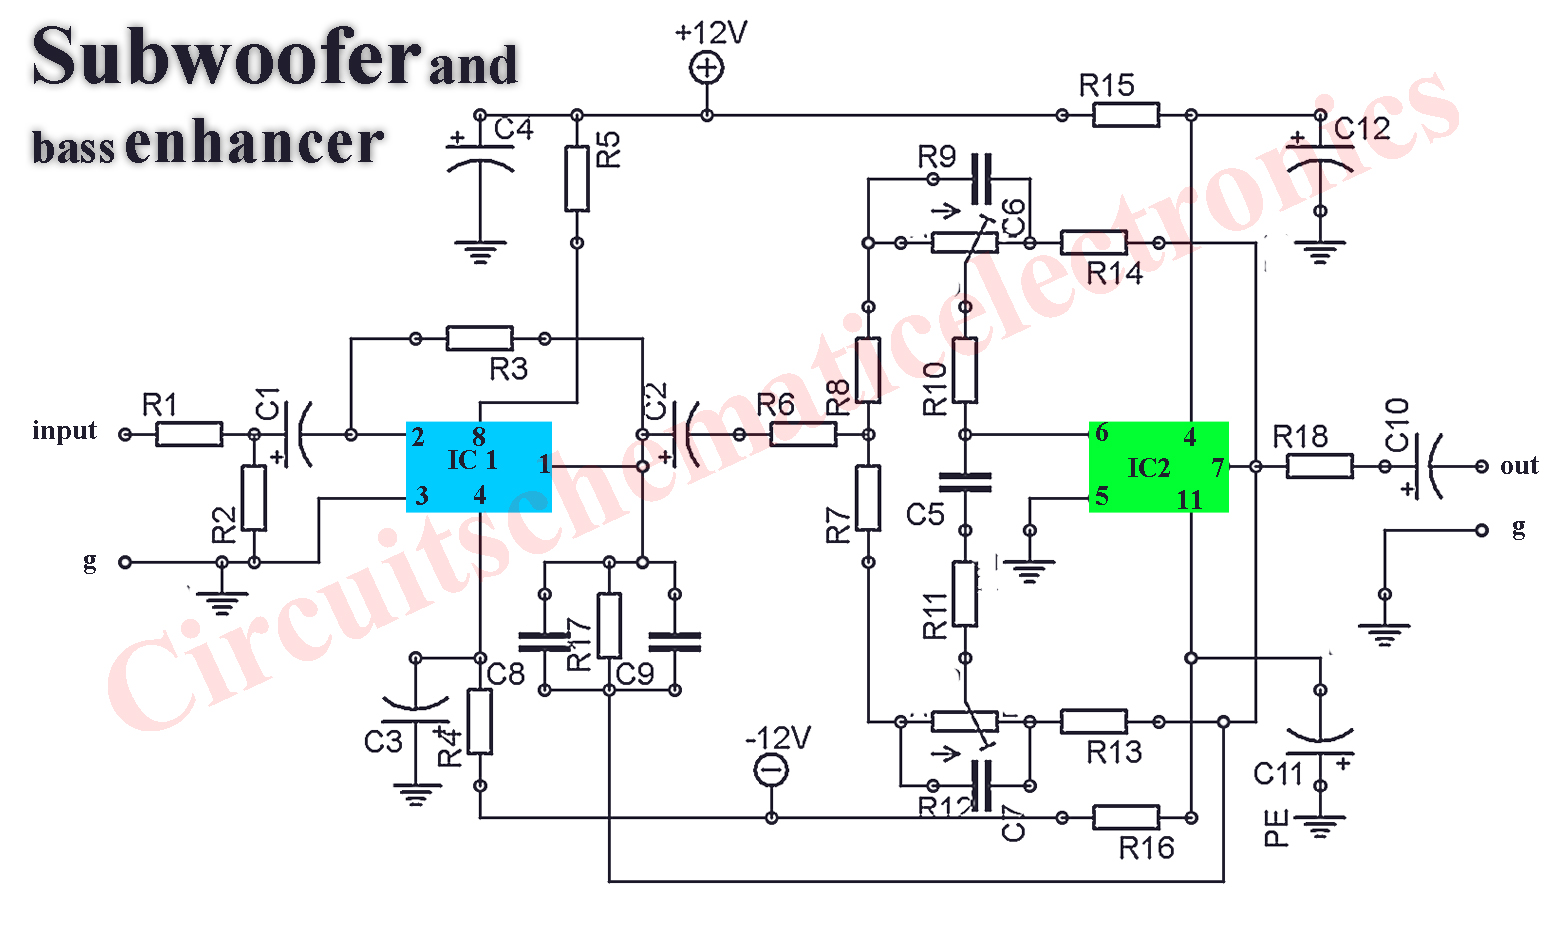 Subwoofer booster circuit with PCB Layout - Electronic Circuit